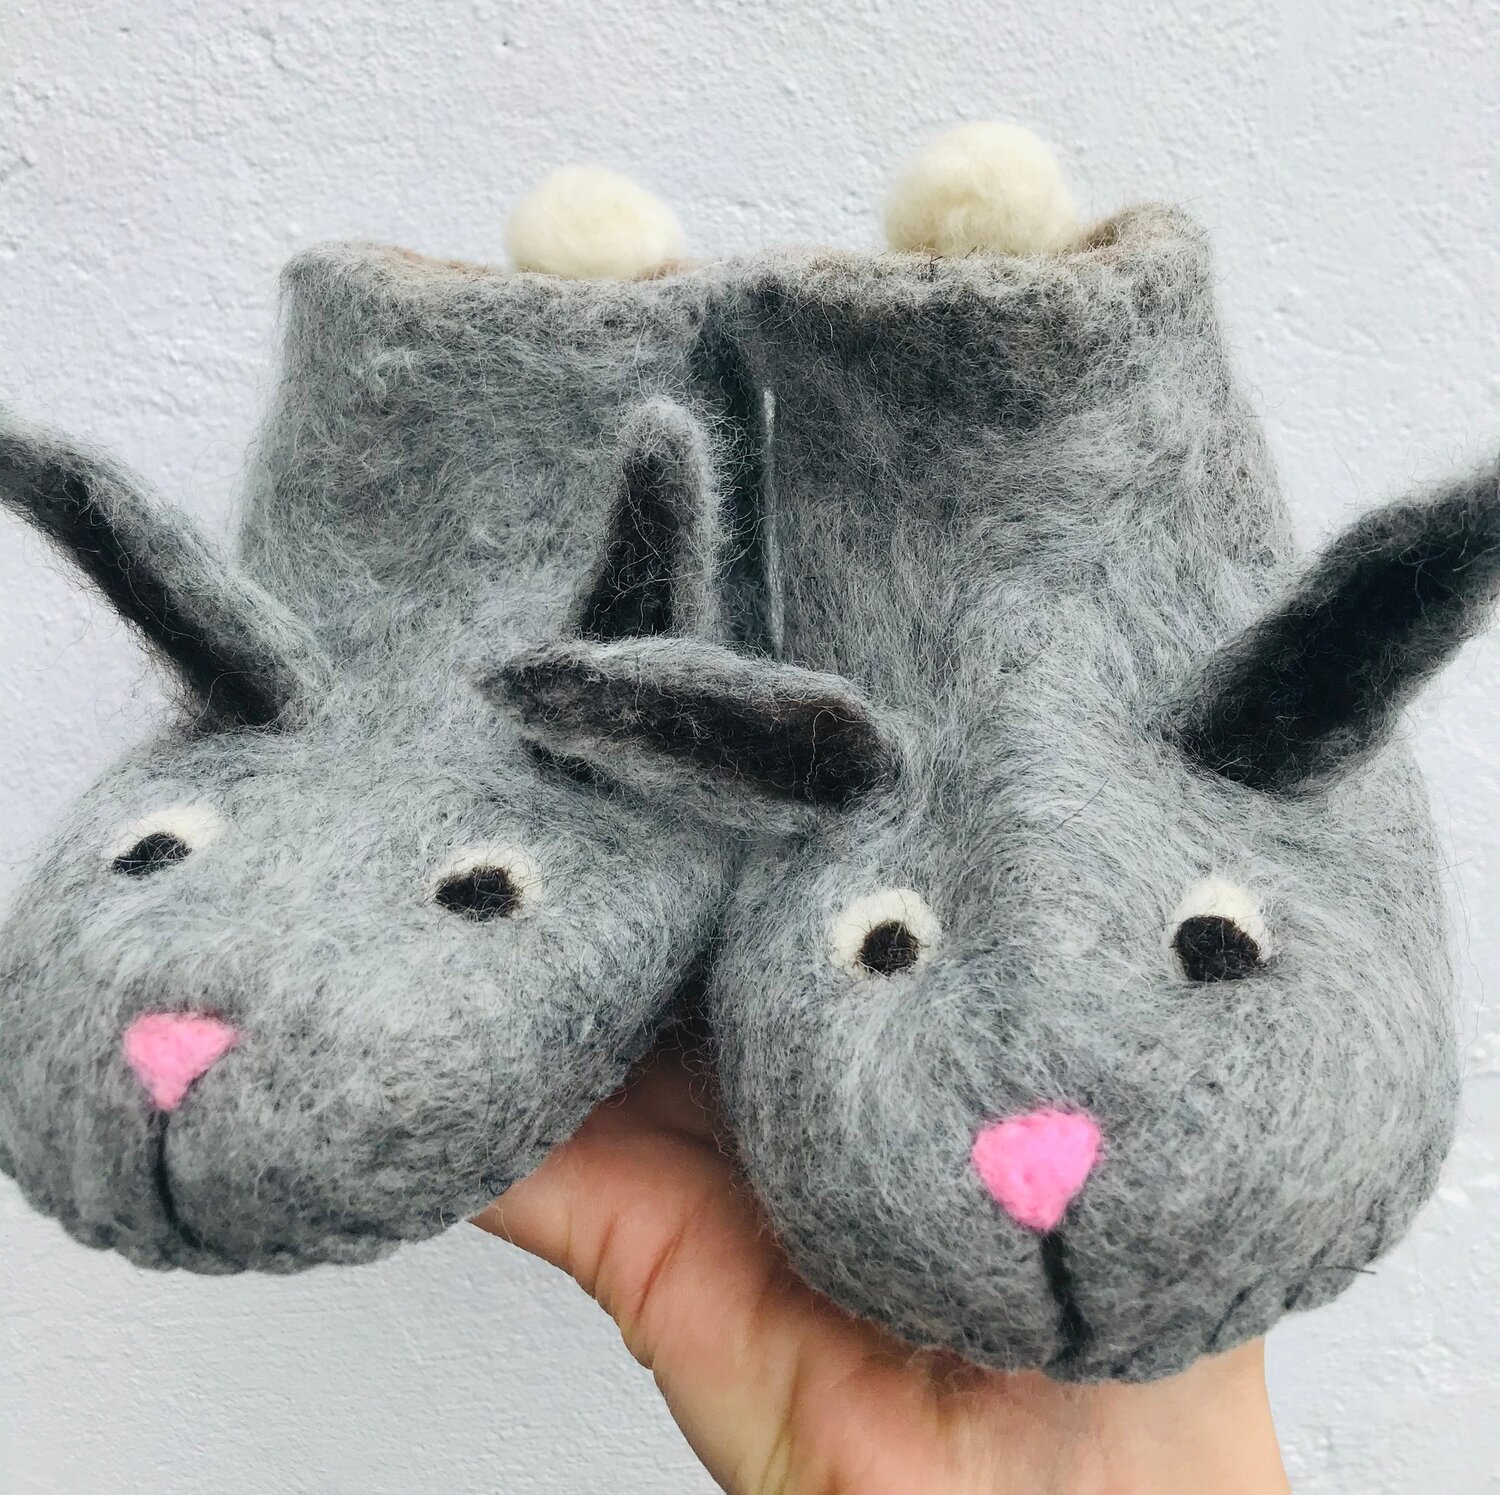 Felted bunny slippers Lucy Antwis